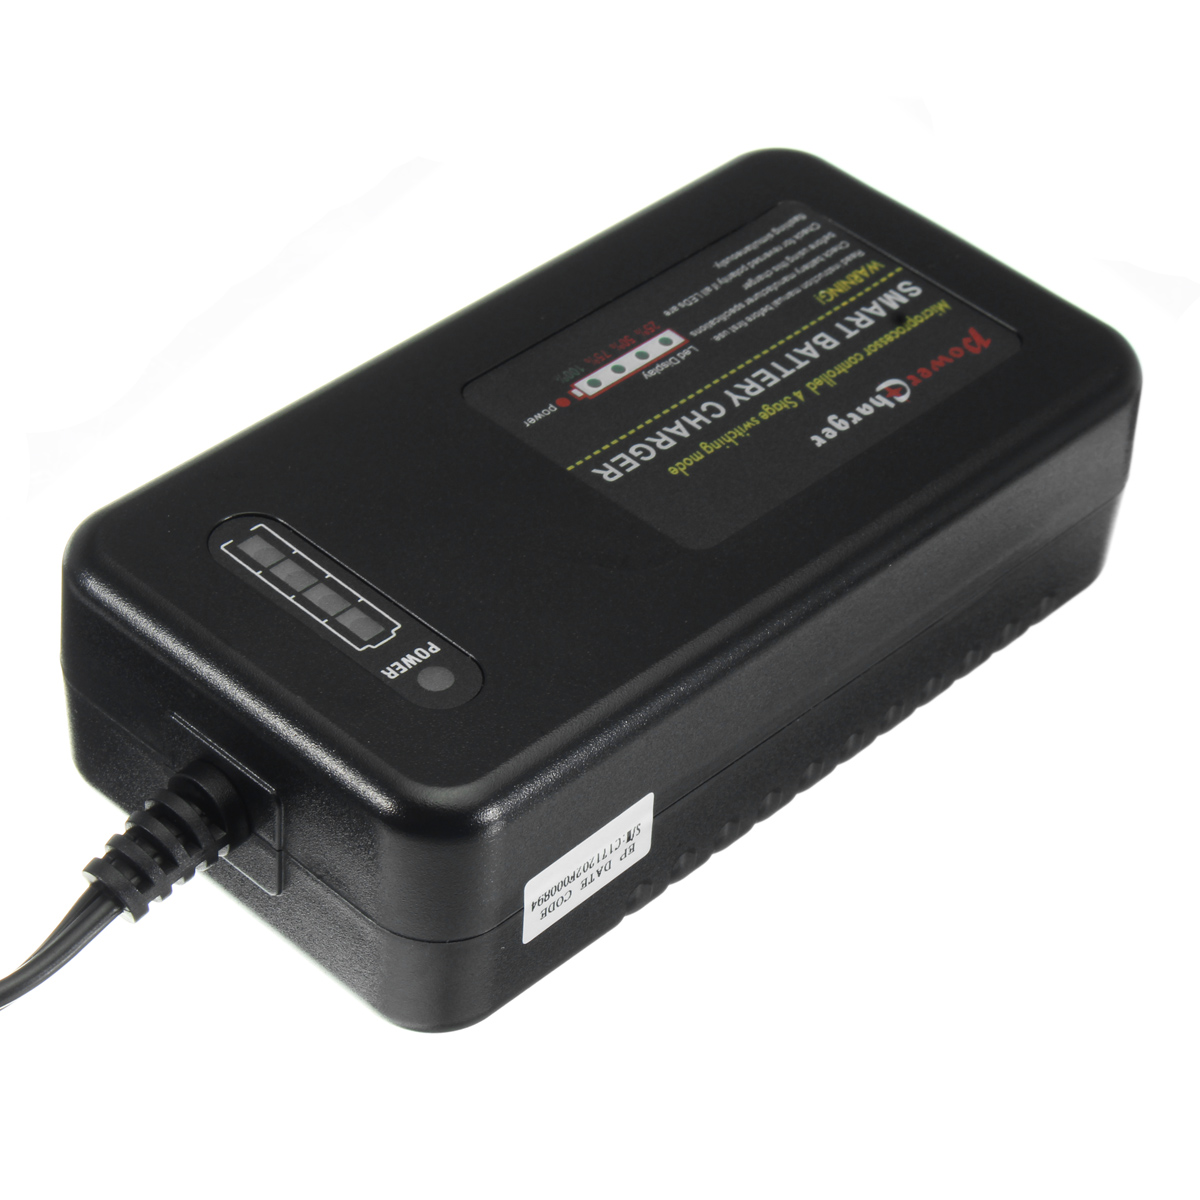 128V-4S-Lifepo4-Lithium-Golf-Battery-Charger-4-Amp-55mm-Dc-Jack-Connector-Plug-1414392